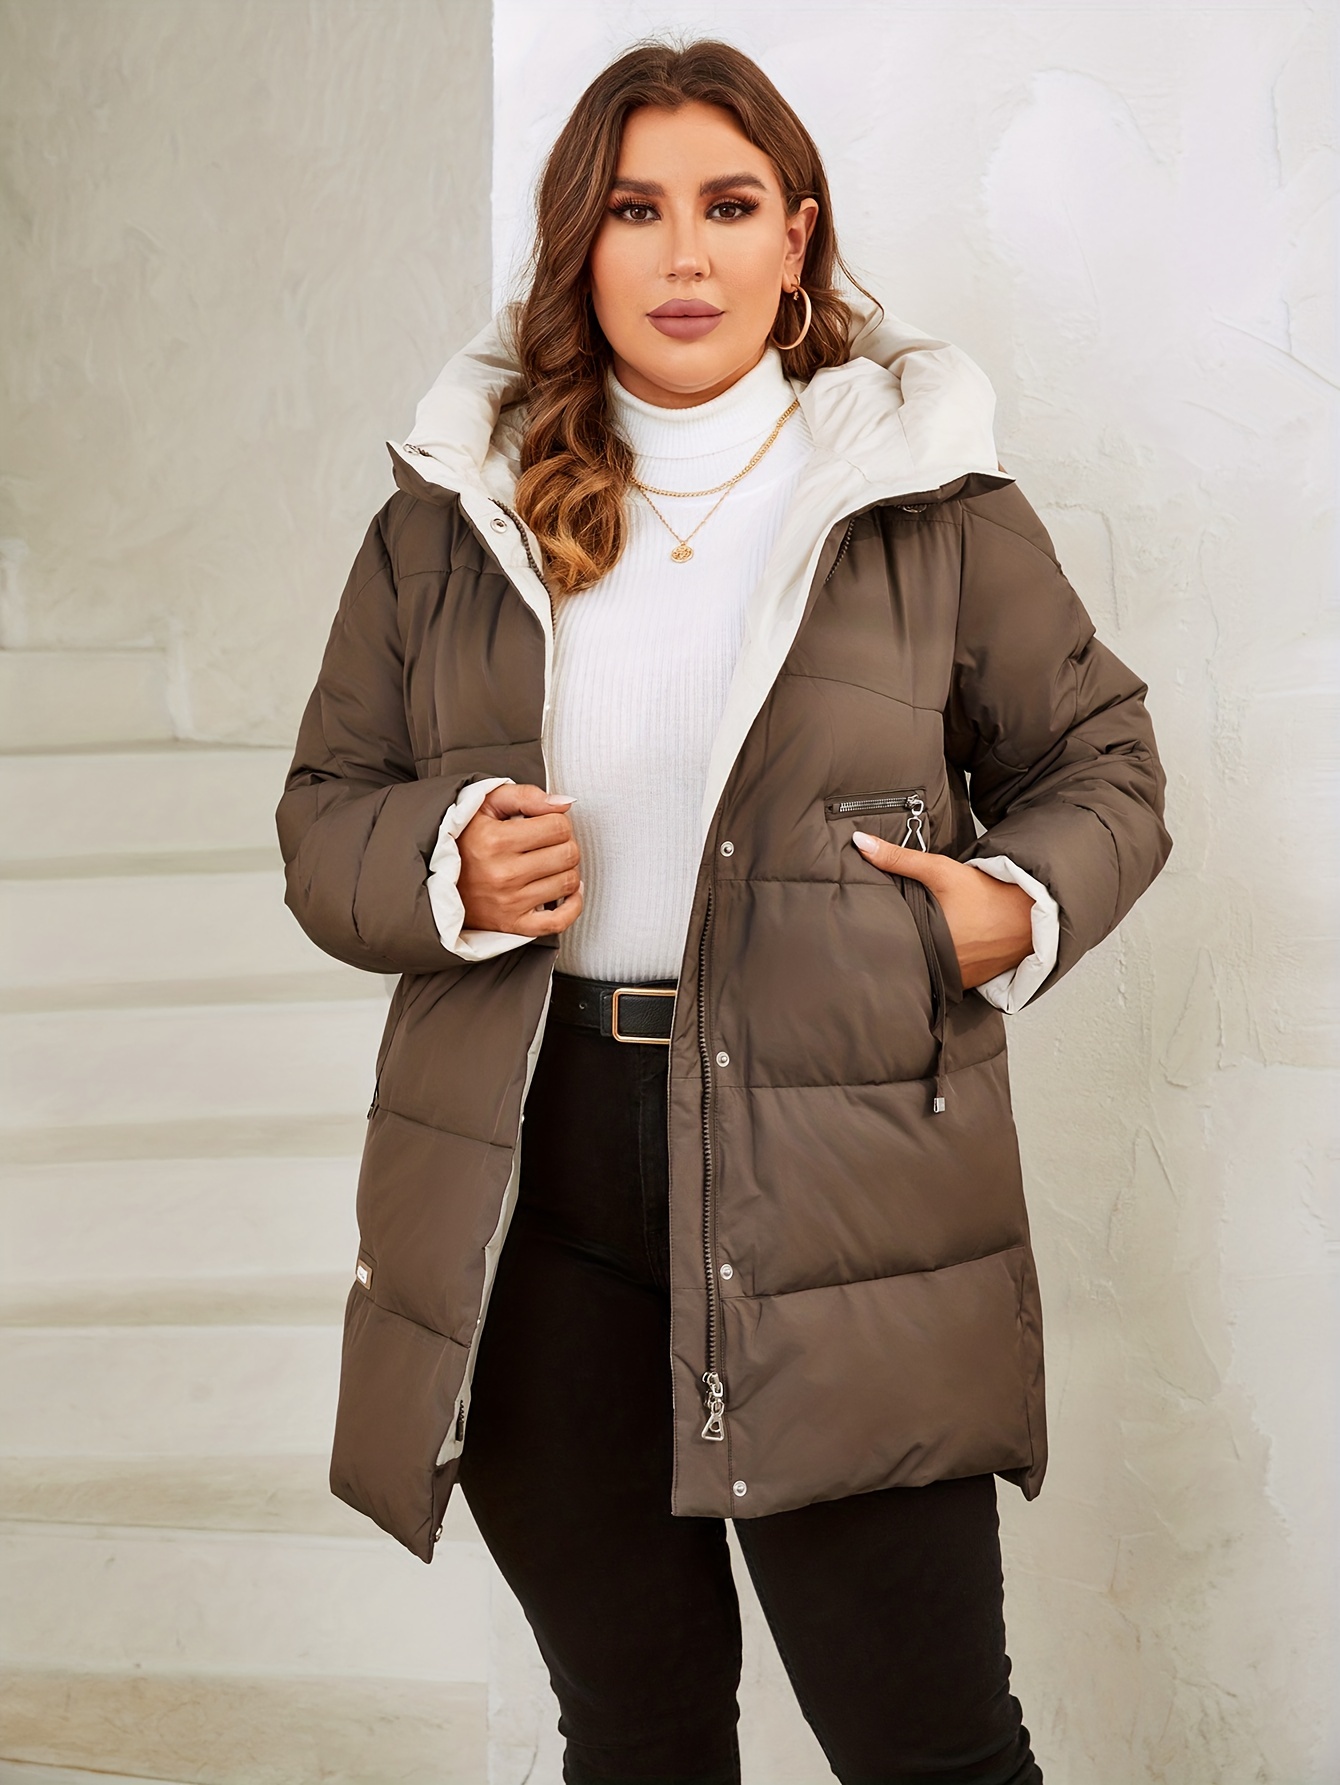 Women's Shiny Puffer Coat Long Sleeve Stand Collar Plus Size